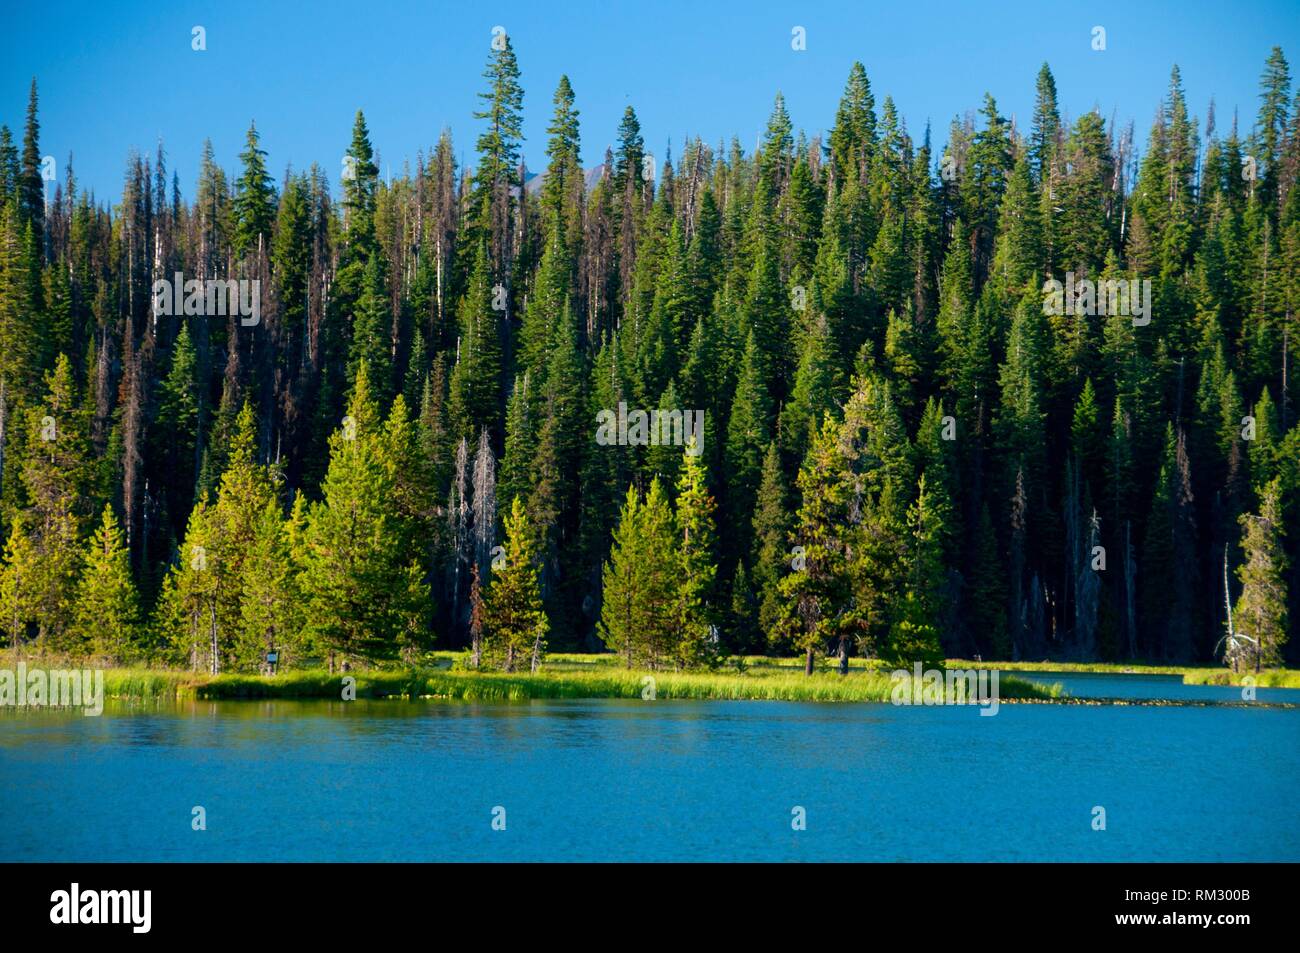 Hosmer Lake, Cascade Lakes National Scenic Byway, Deschutes National Forest, Oregon. Stock Photo